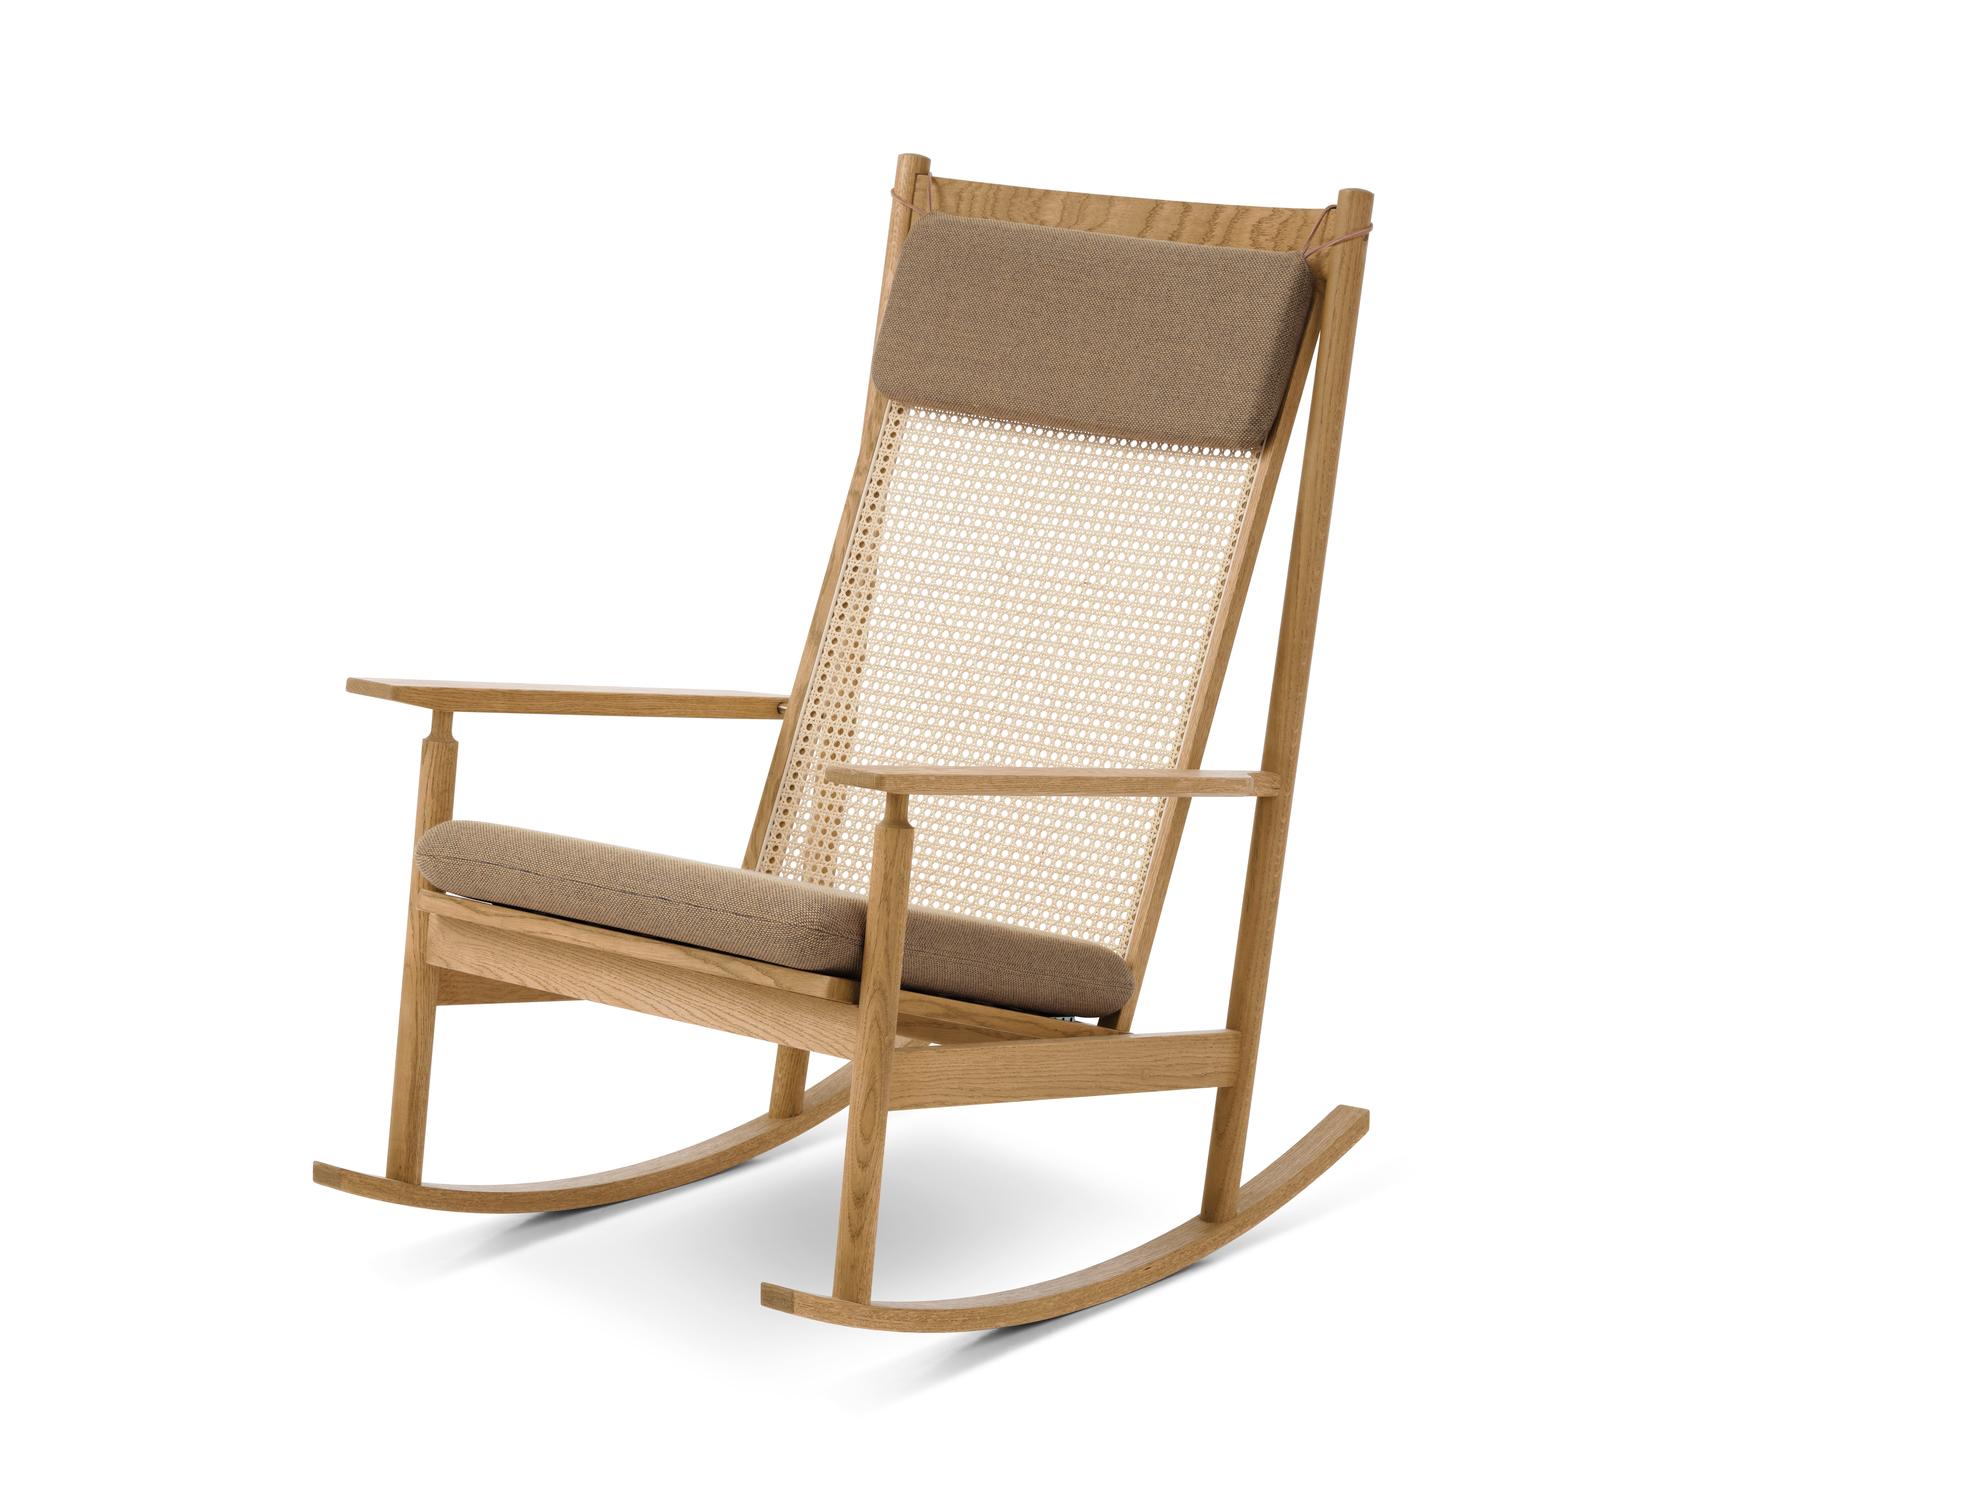 Swing rocking chair rewool oak light syrup by Warm Nordic
Dimensions: D91 x W68 x H 103 cm
Material: Wood, Foam, Rubber springs, French cane, Textile or leather upholstery, Oak
Weight: 16.5 kg
Also available in different colours, materials and